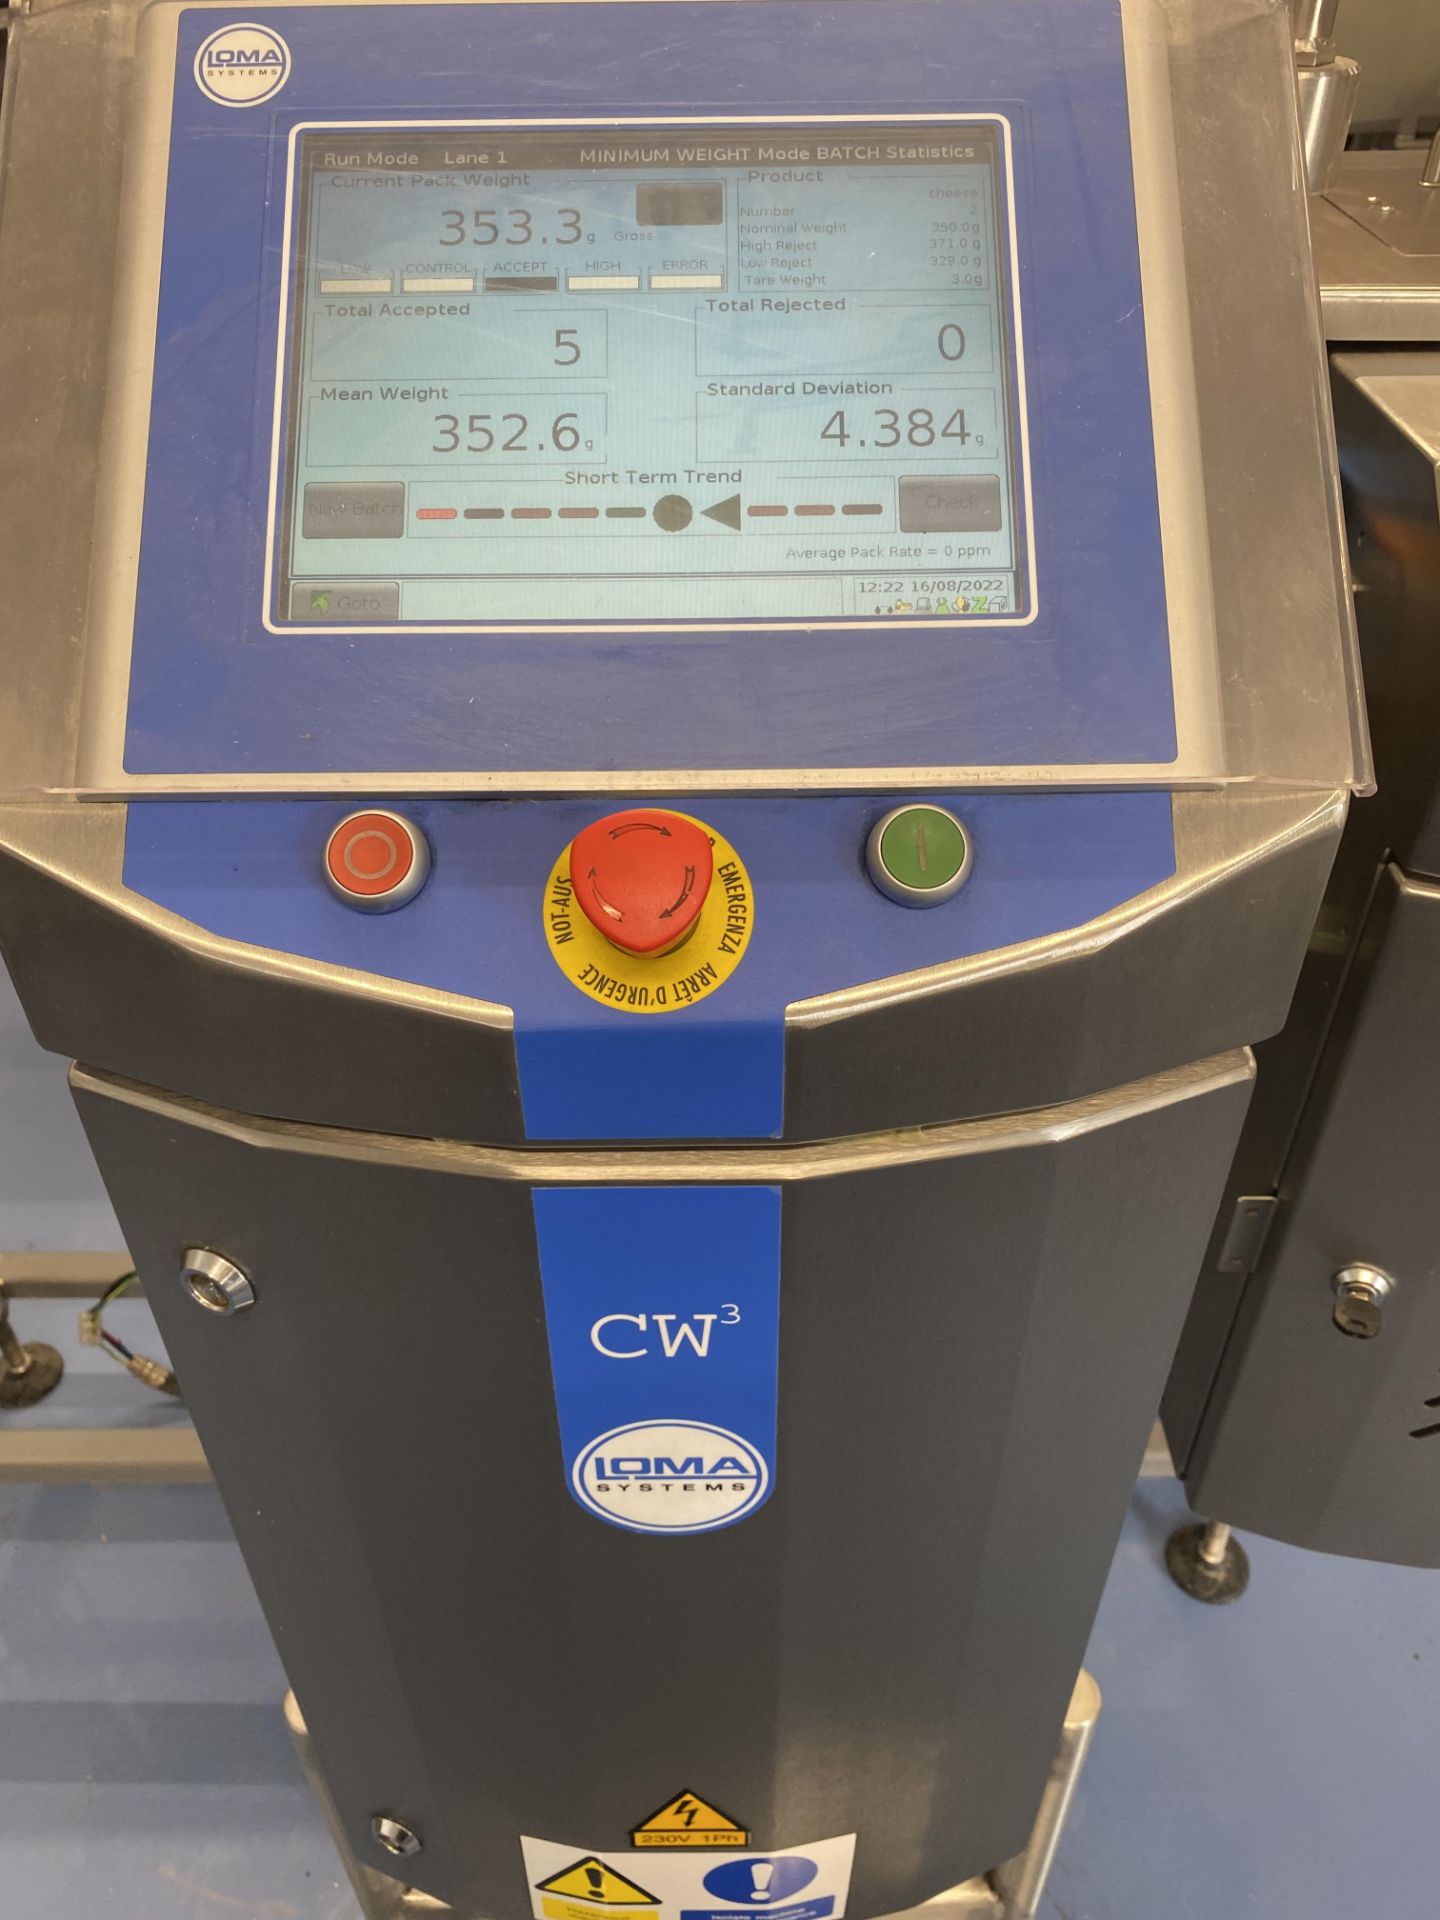 LOMA CW3 CHECKWEIGHER. - Image 7 of 9